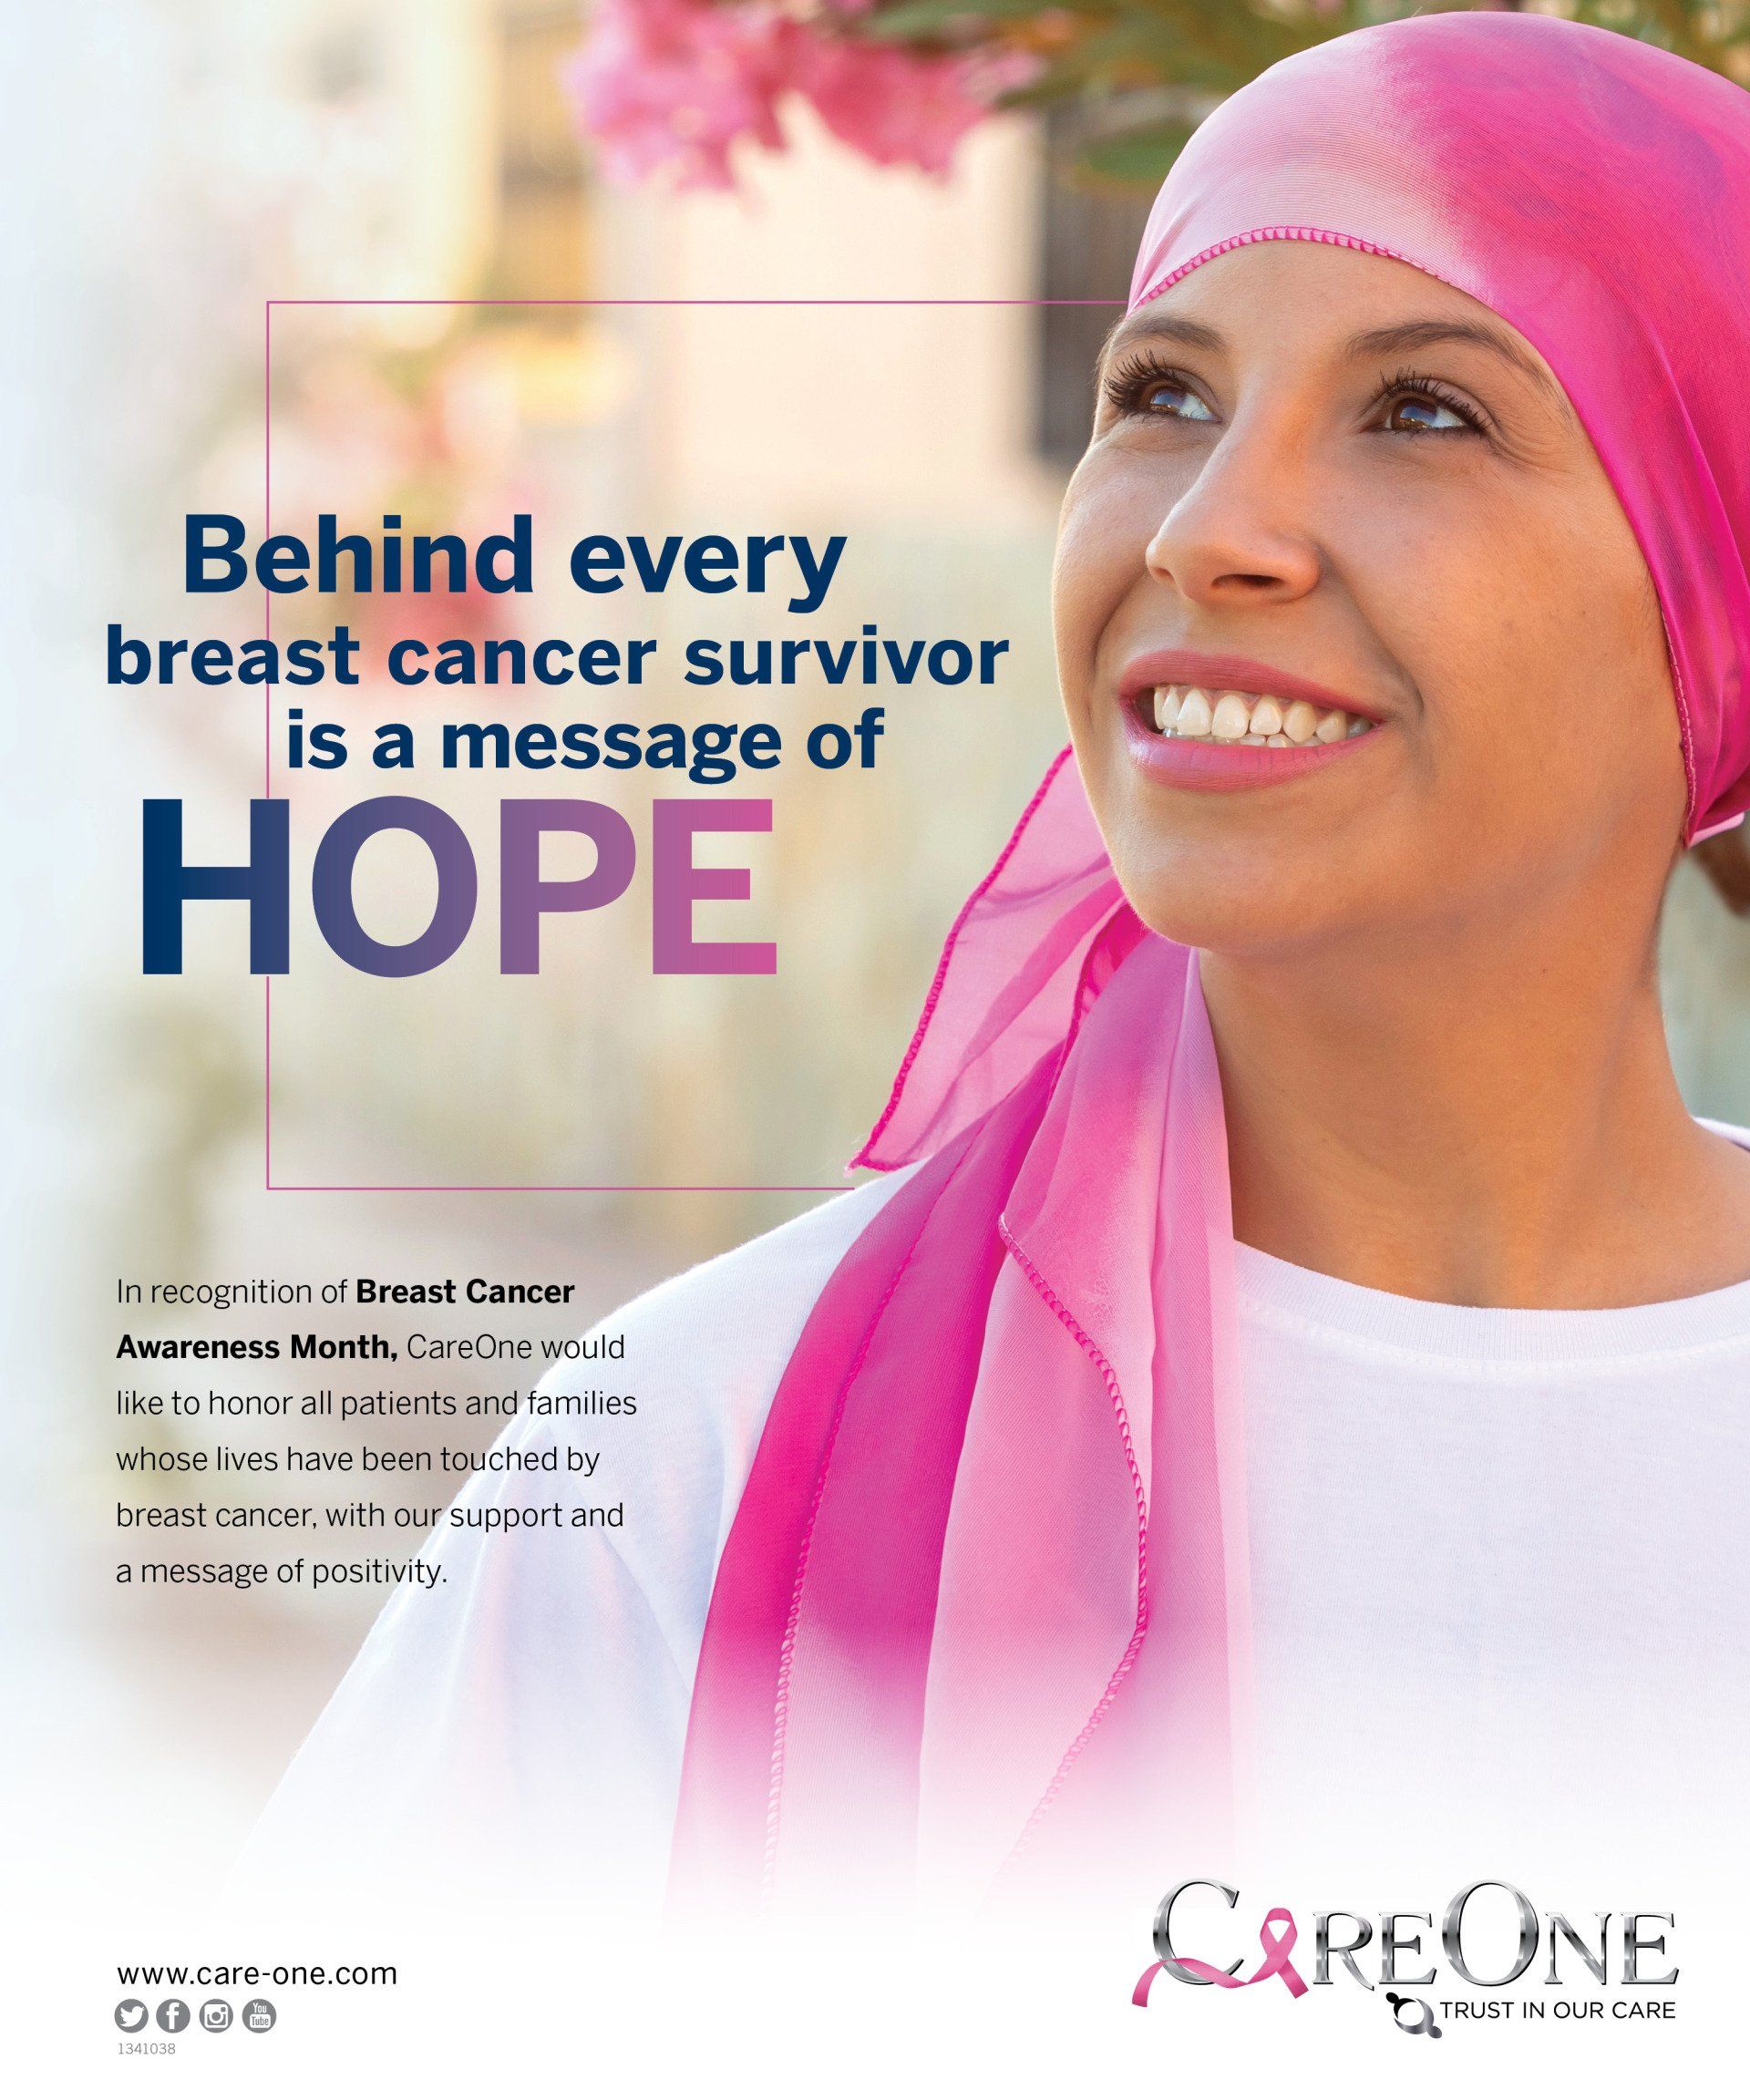 Behind every breast cancer survivor is a message of hope